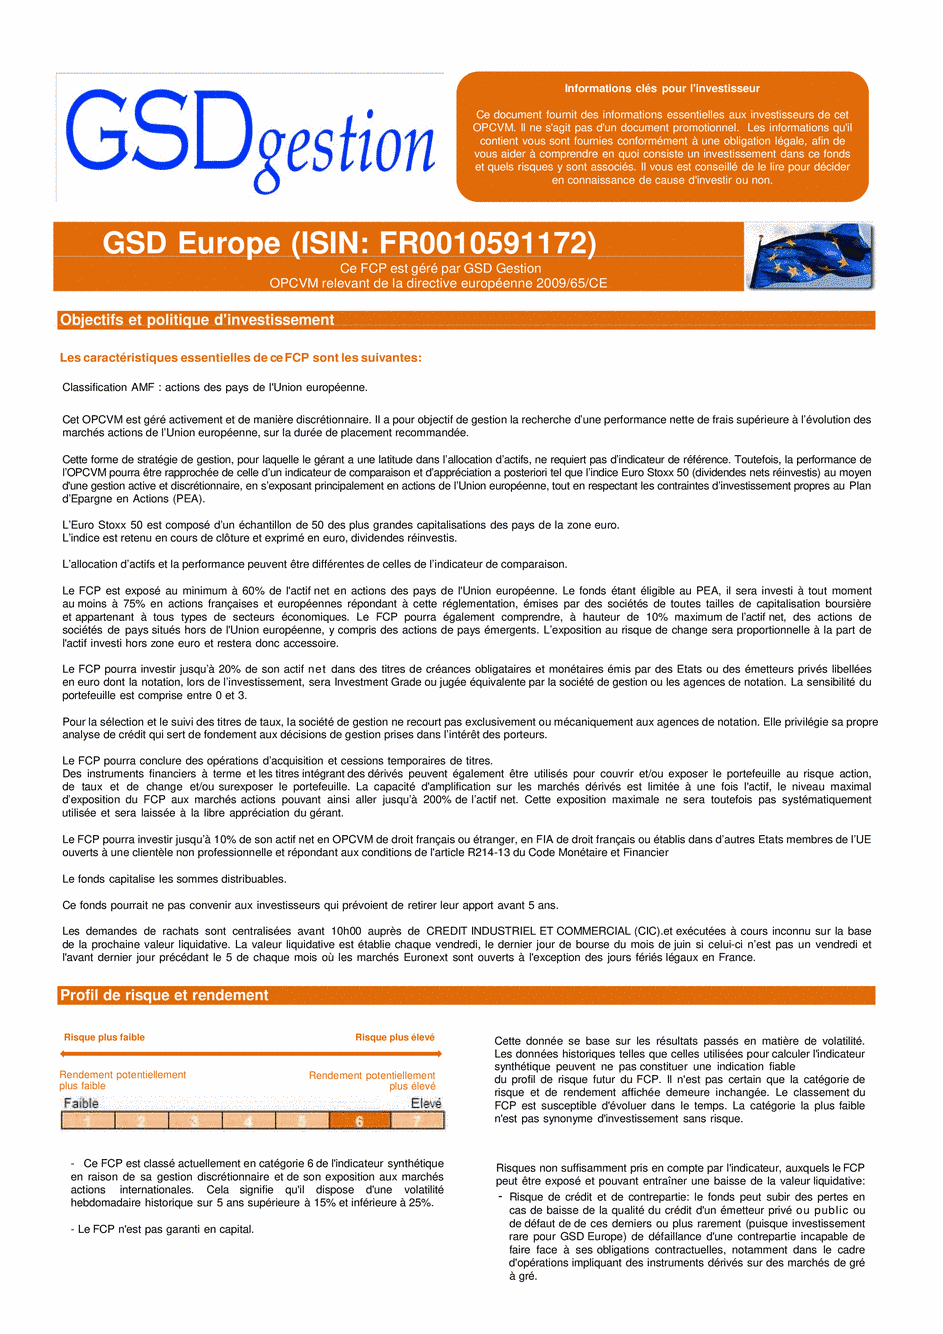 DICI-Prospectus Complet GSD Europe - 11/01/2021 - French